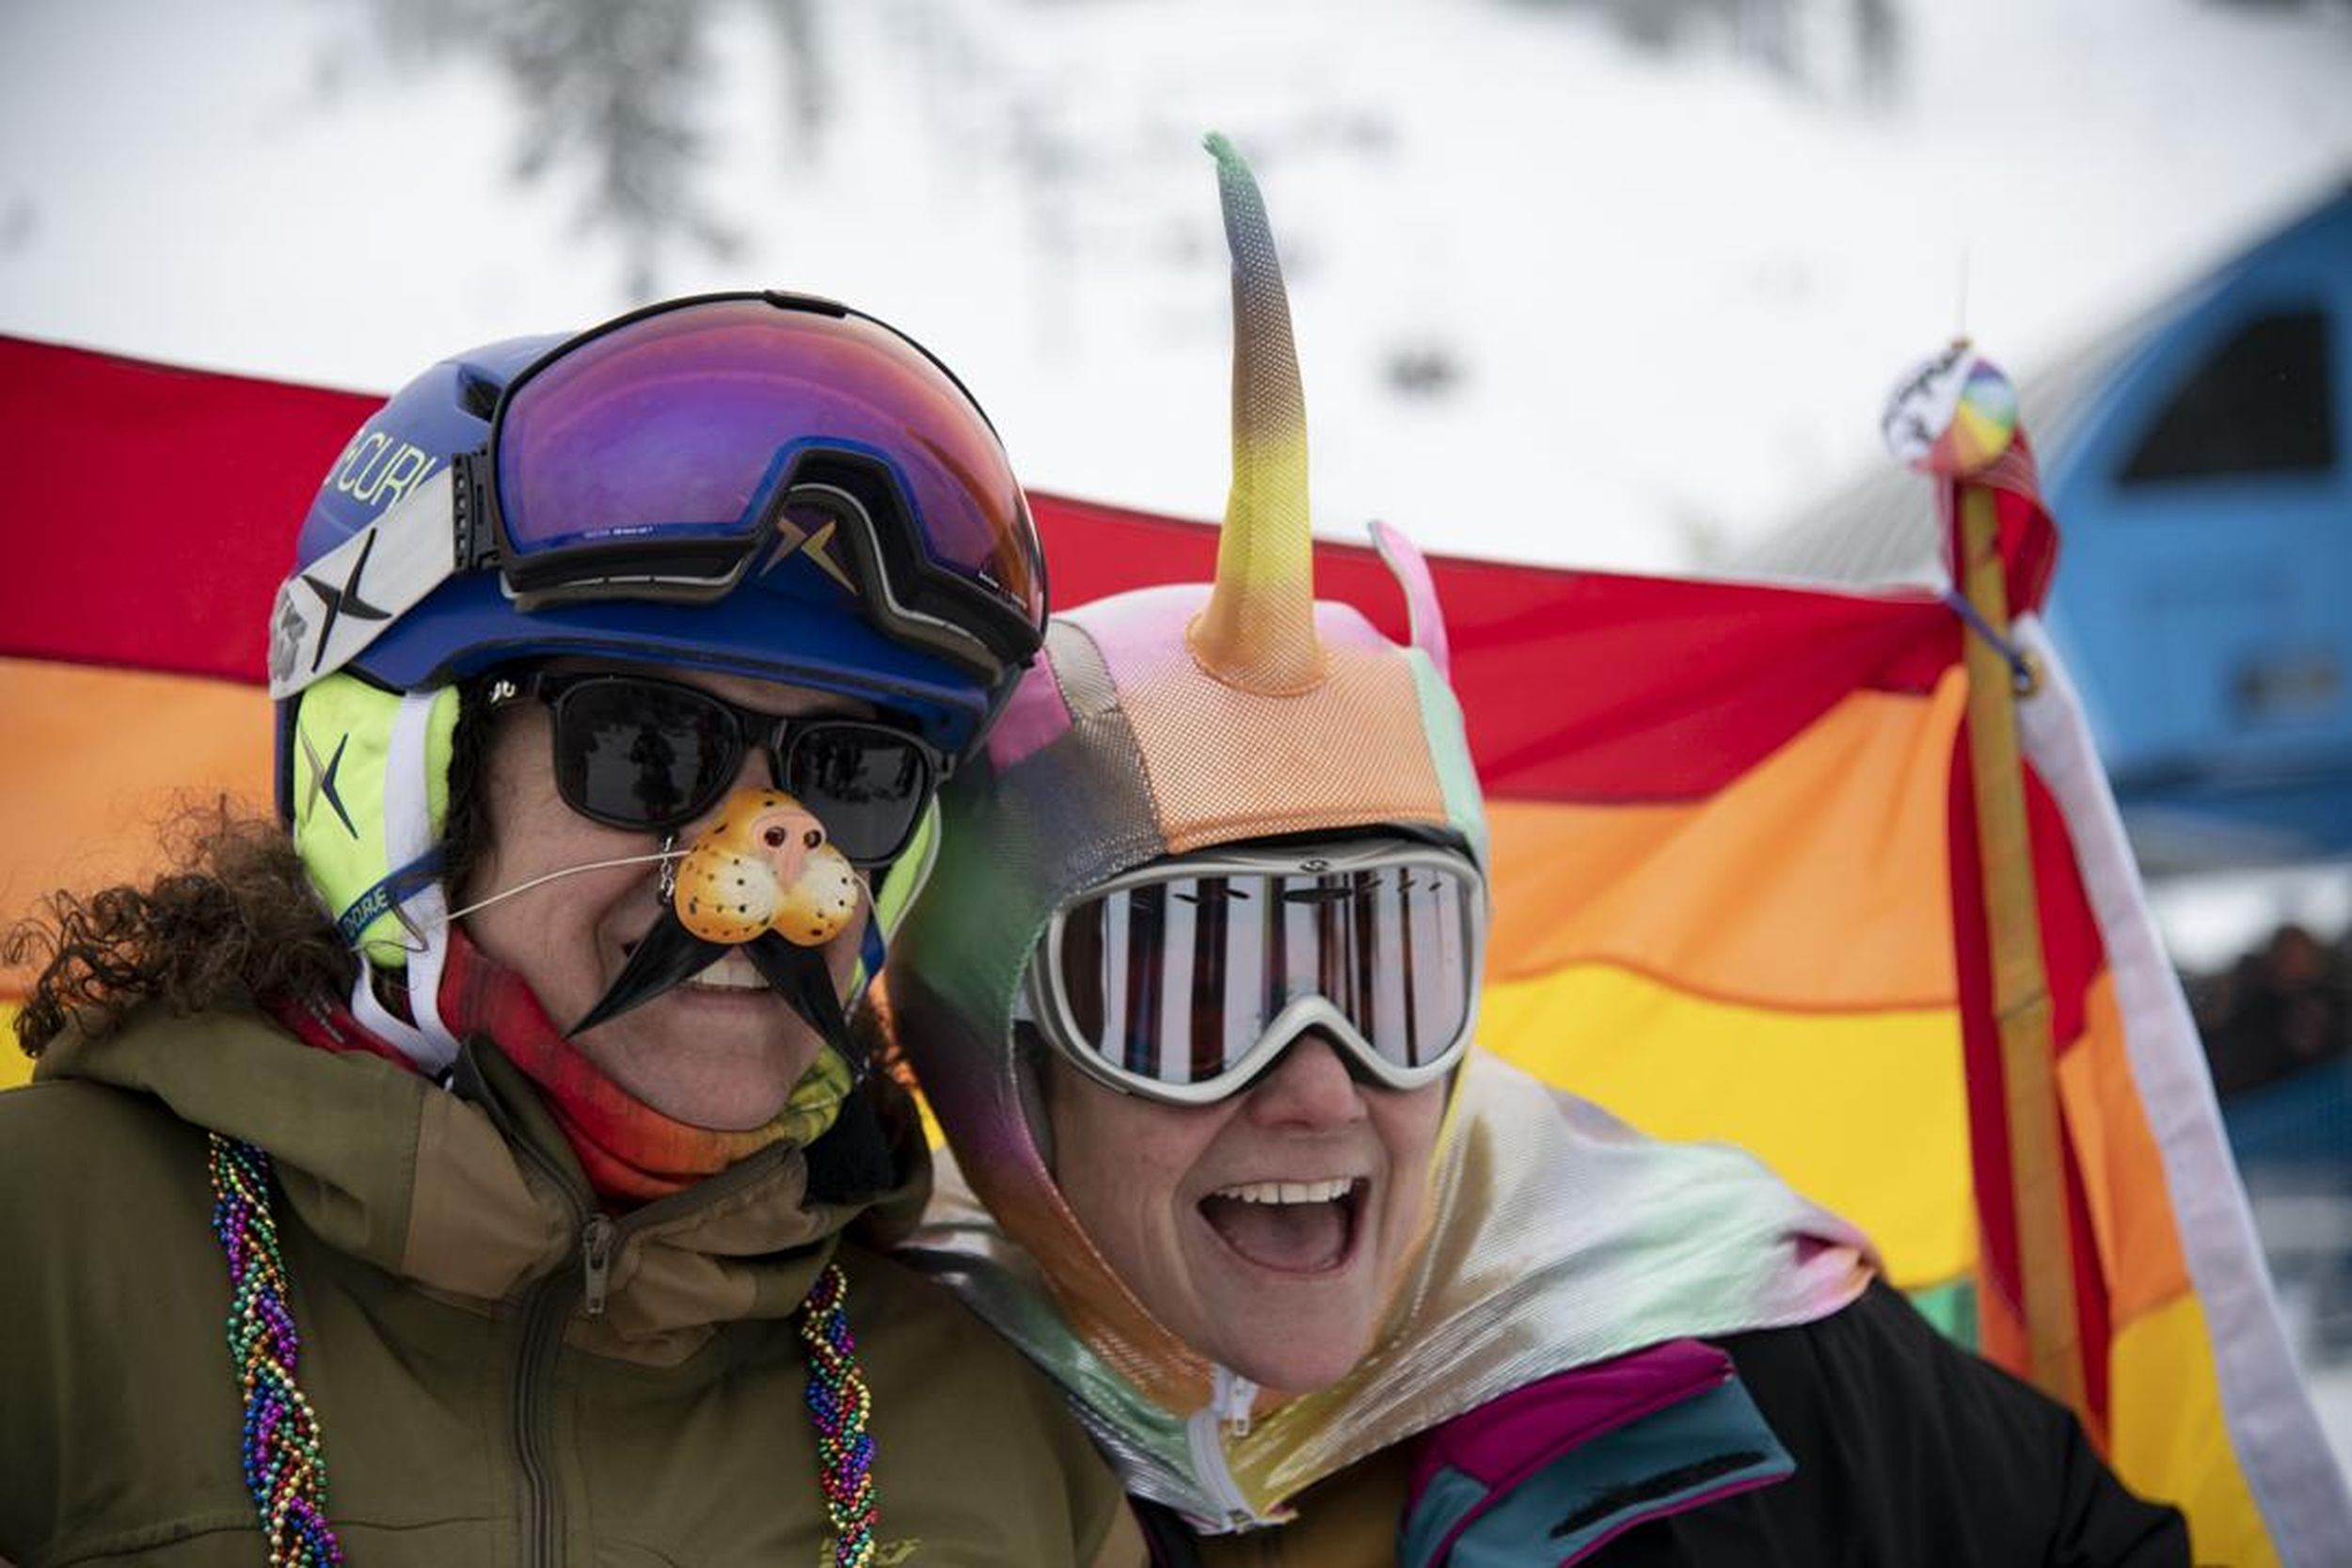 LGBTQ+ festival putting pride on the slopes of Mt. Bachelor | The ...